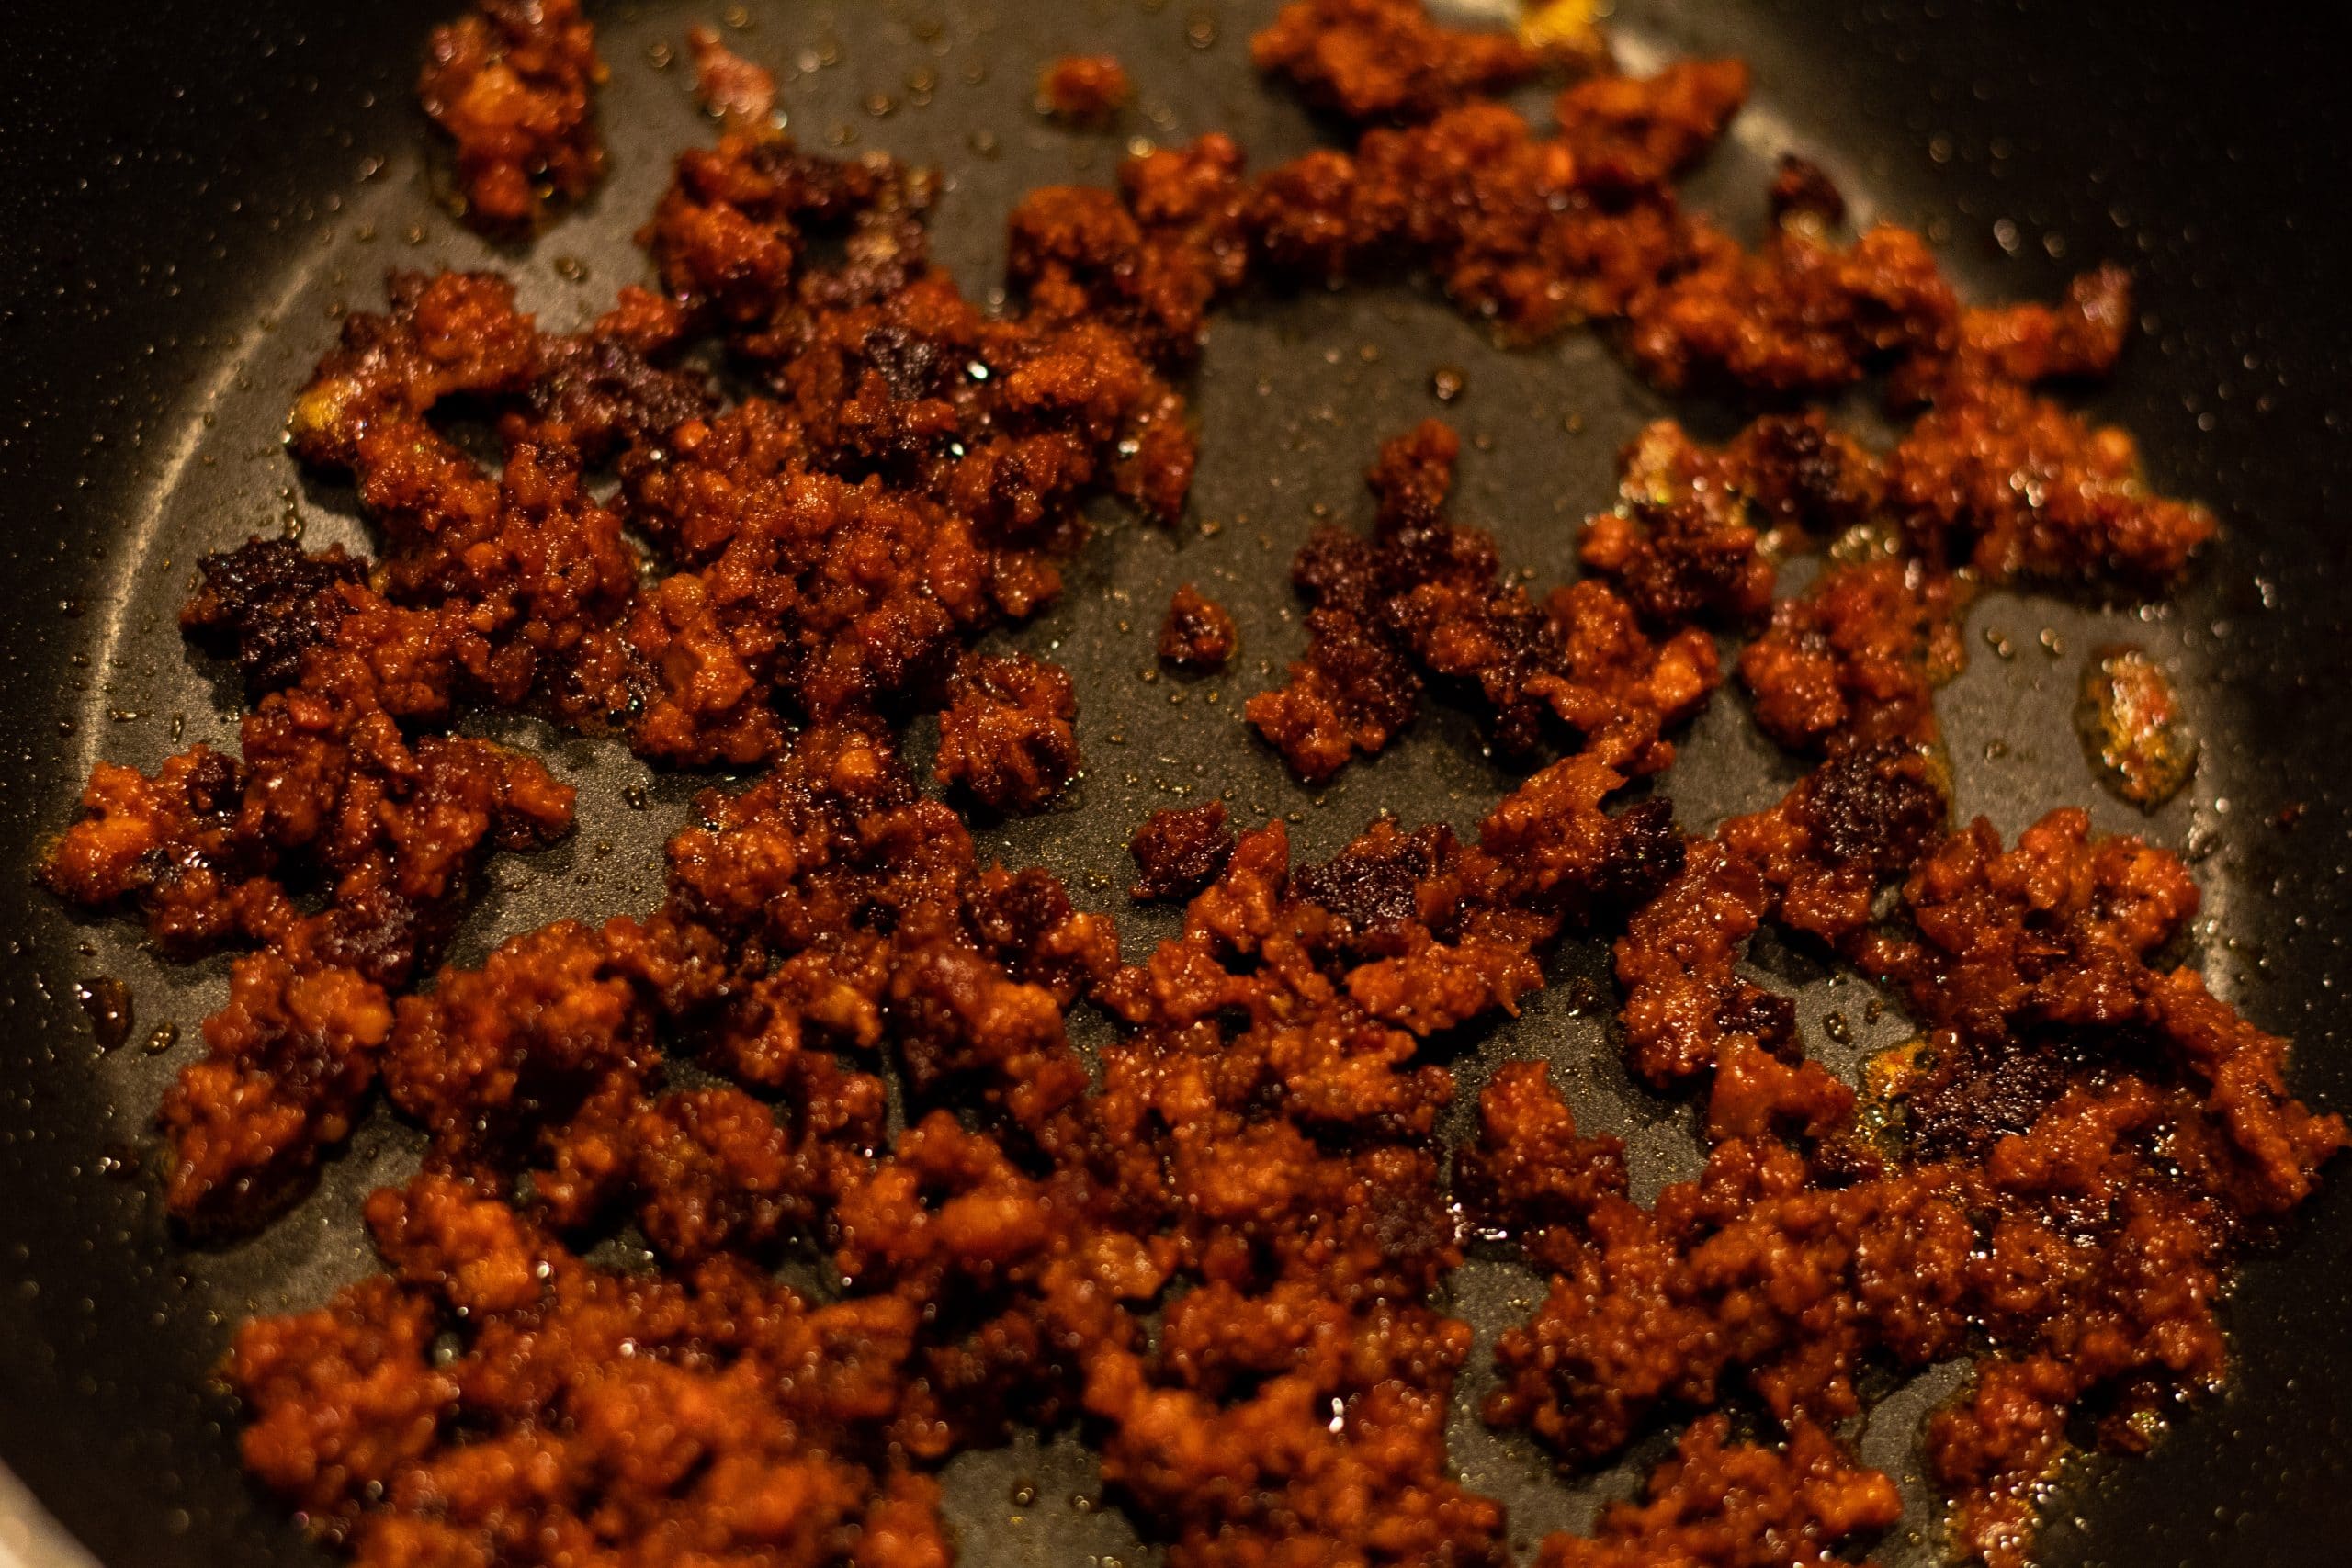 This is an image of cooked chorizo in a pan.